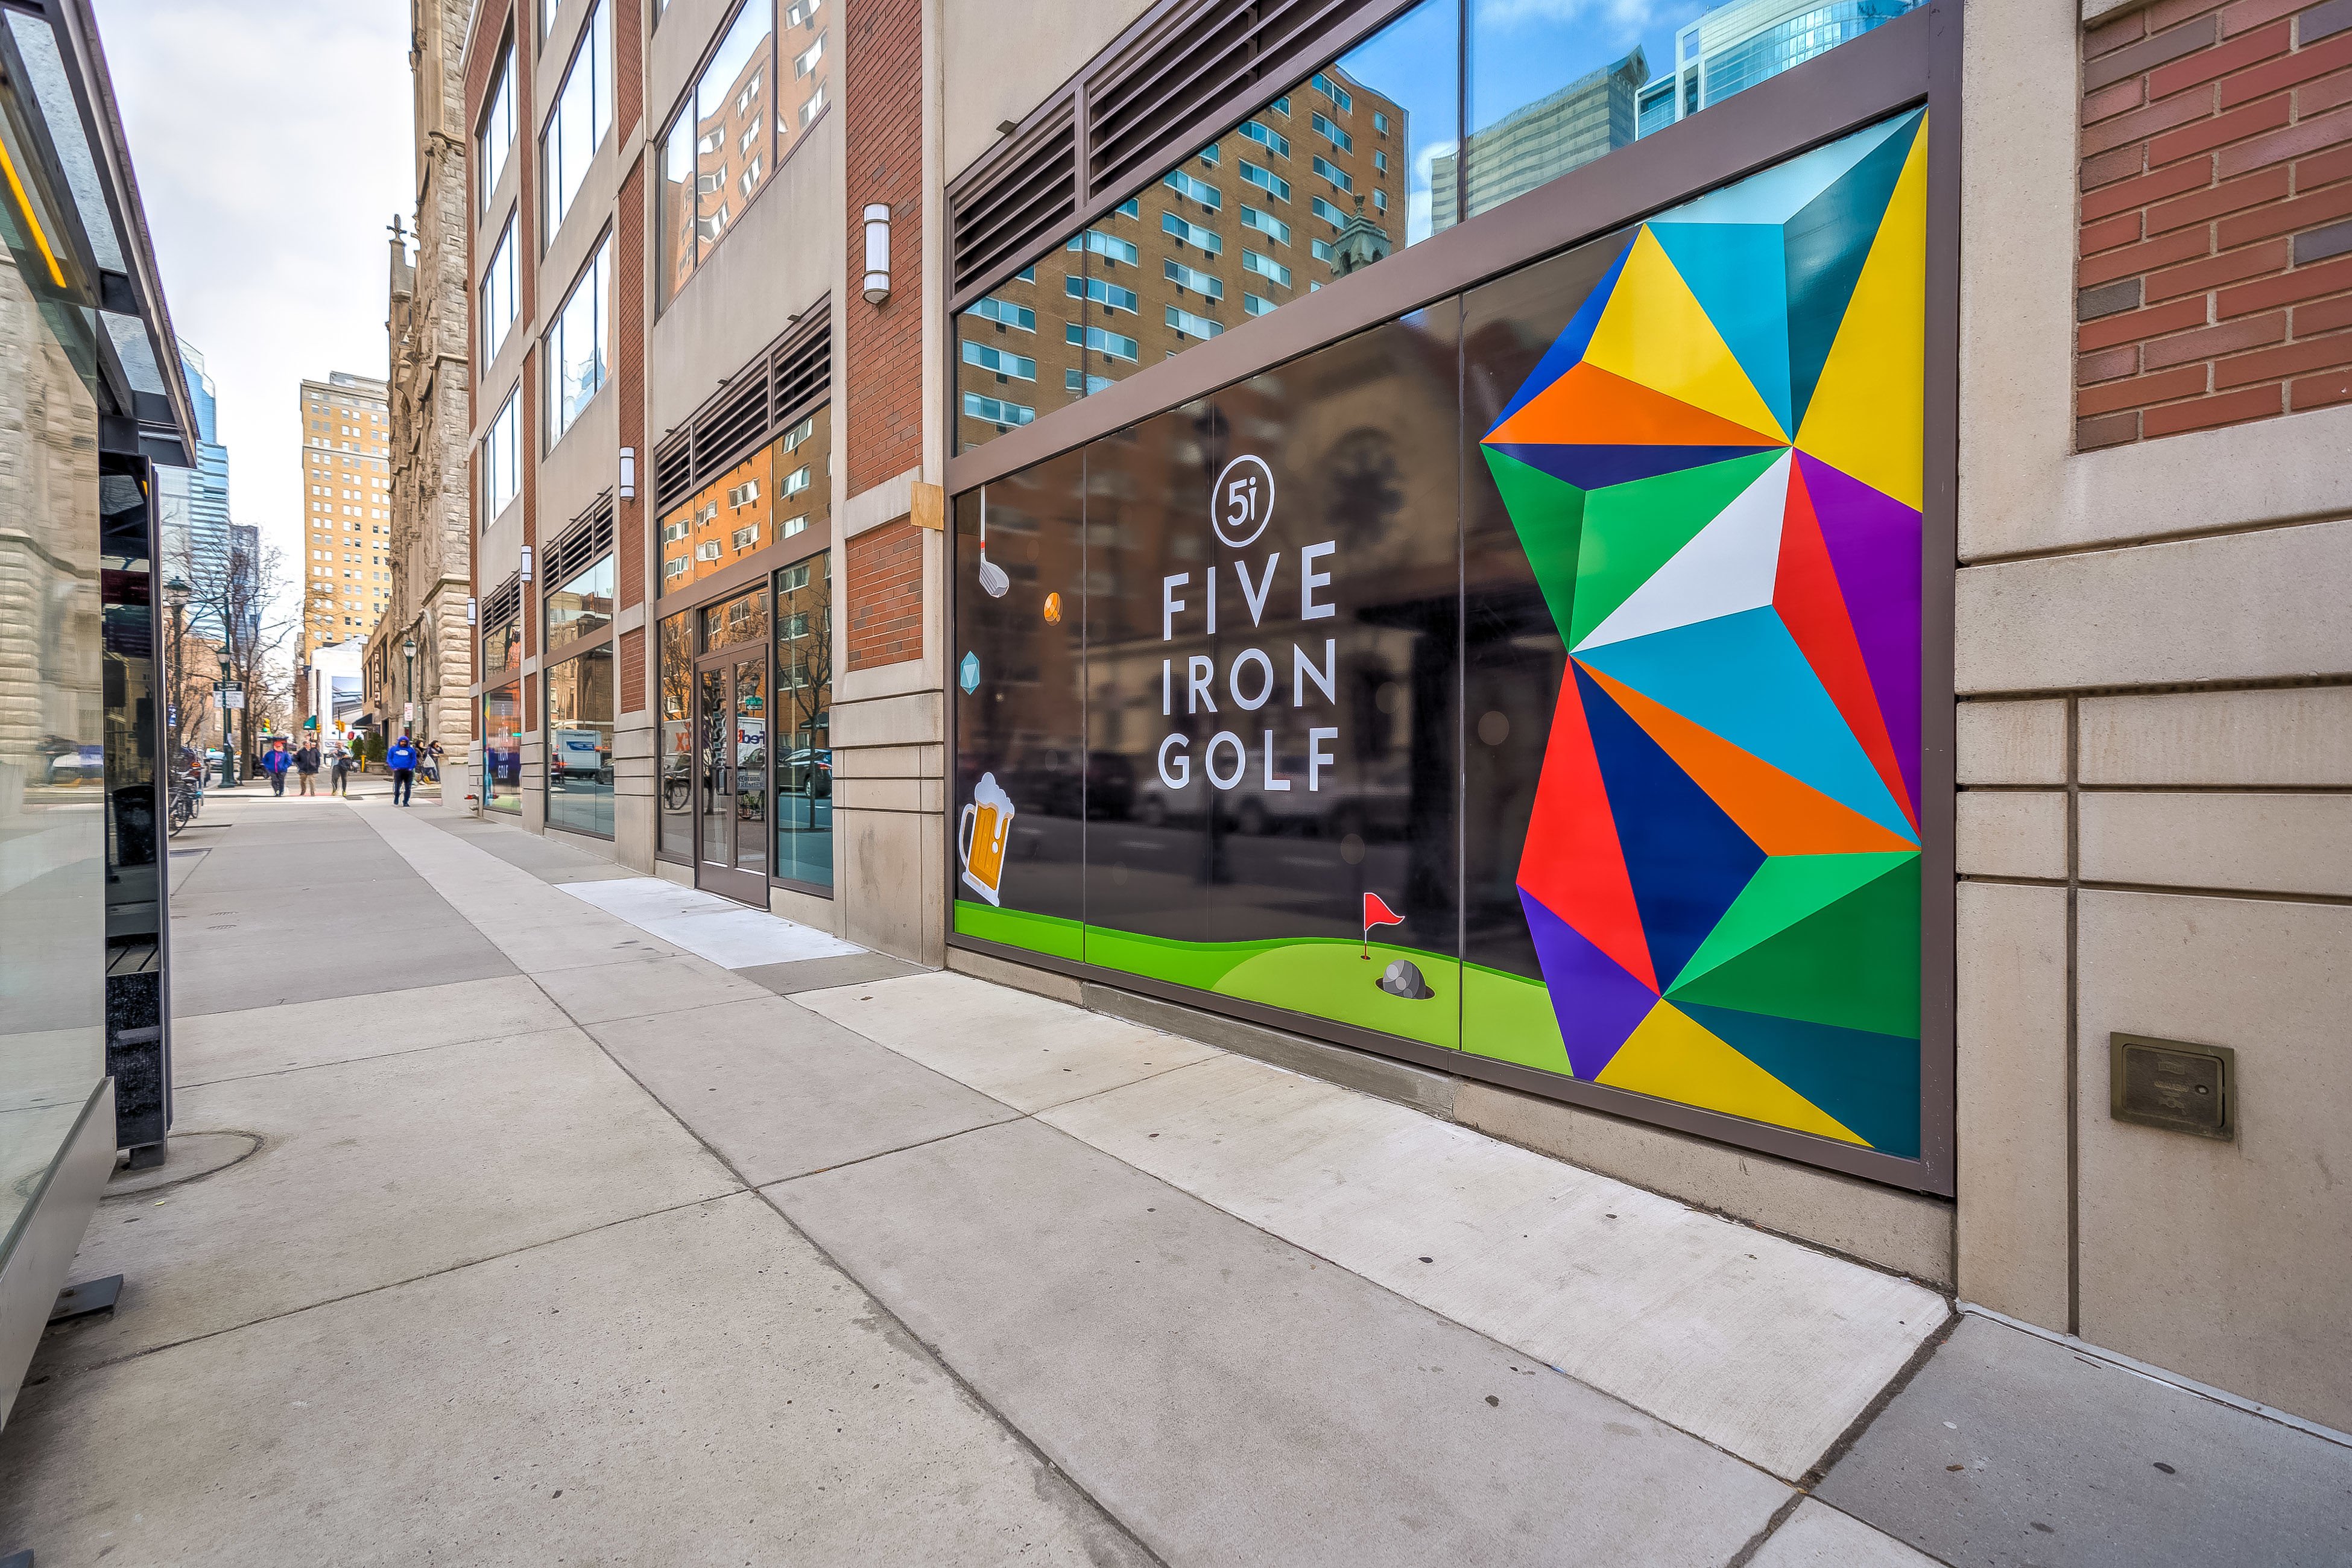 Fore! Swing on over to Five Iron Golf  - Lessons, Fun, and Events.